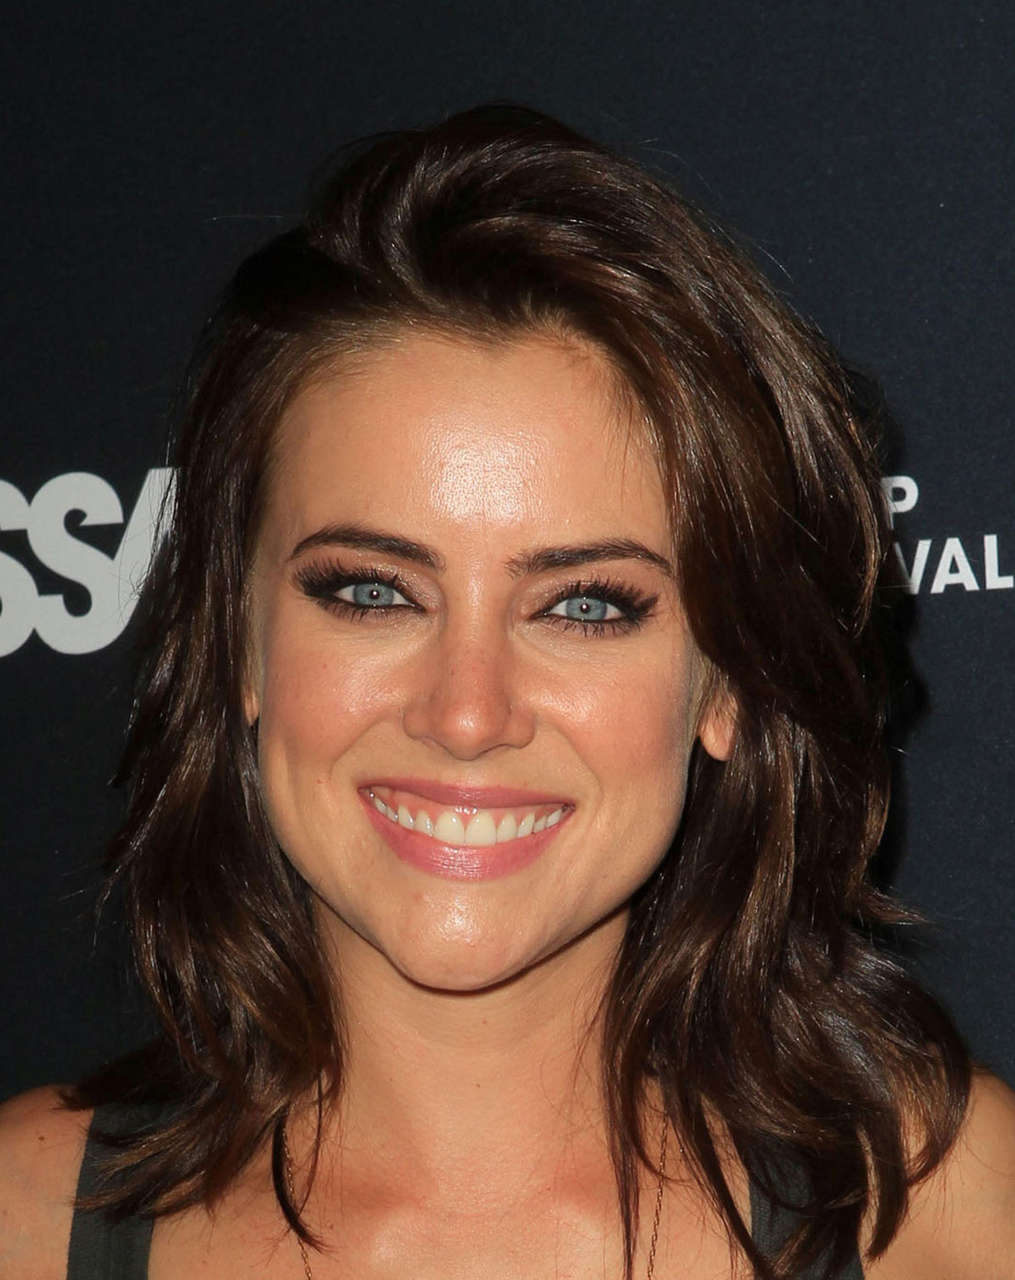 Jessica Stroup Sunset Strip Music Festival Vip Party Los Angeles